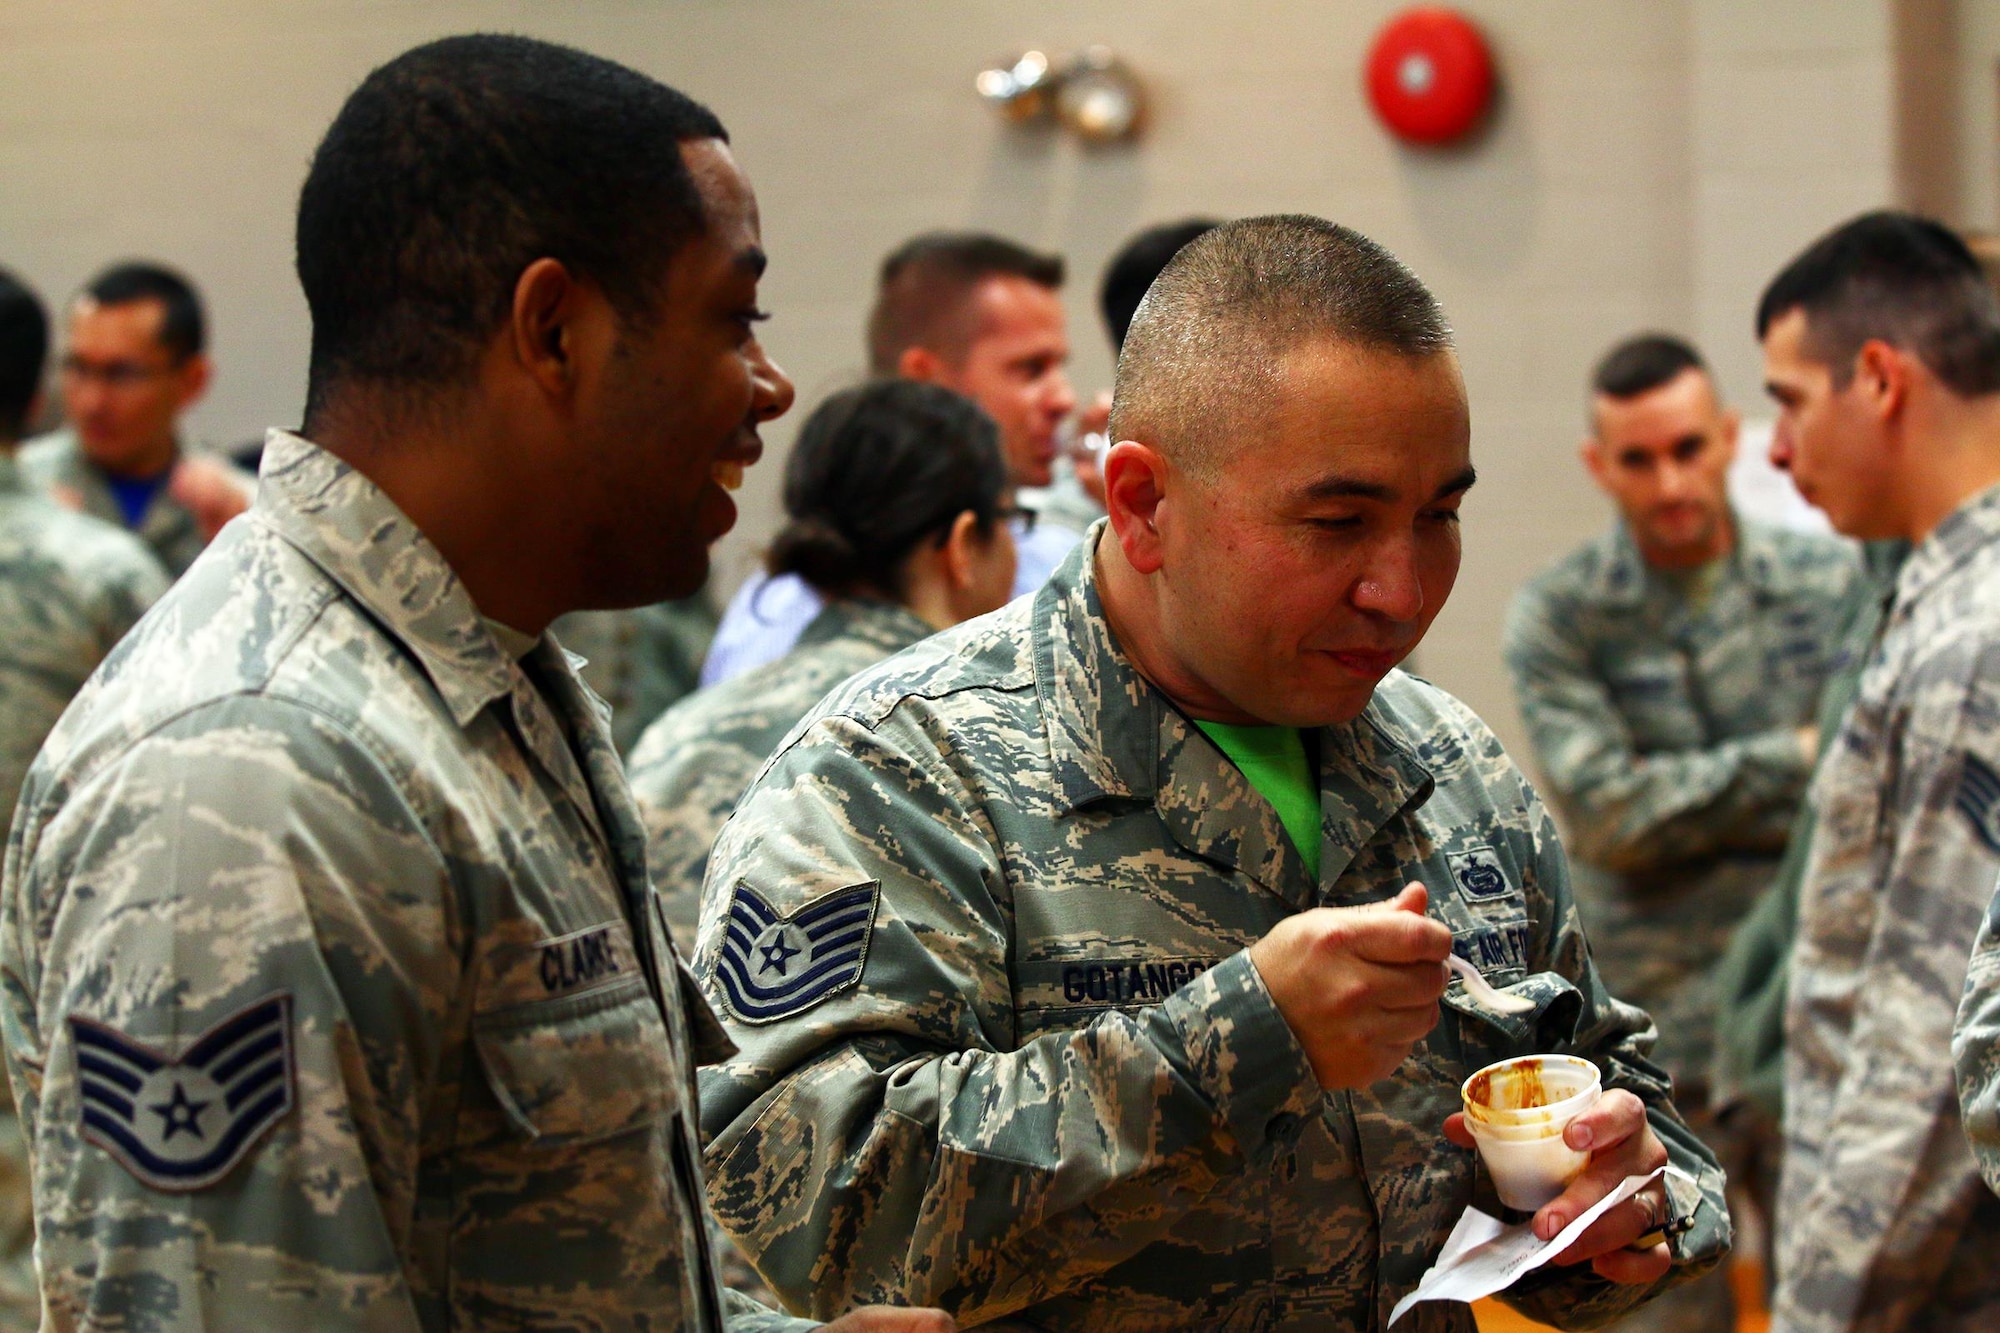 (far right) Tech. Sgt. Cresente Gotangco, Jr., 64th Intelligence Squadron, takes a sample of chili while judging the 2016 655th Intelligence, Surveillance and Reconnaissance Group Chili Cook-Off at the USO here Nov. 19, 2016. The four categories were: best overall, spiciest, white chili and most creative.Capt. James Spindler, 64th IS, was selected as the overall winner of the contest. (U.S. Air Force photo /Tech. Sgt. Patrick O’Reilly)